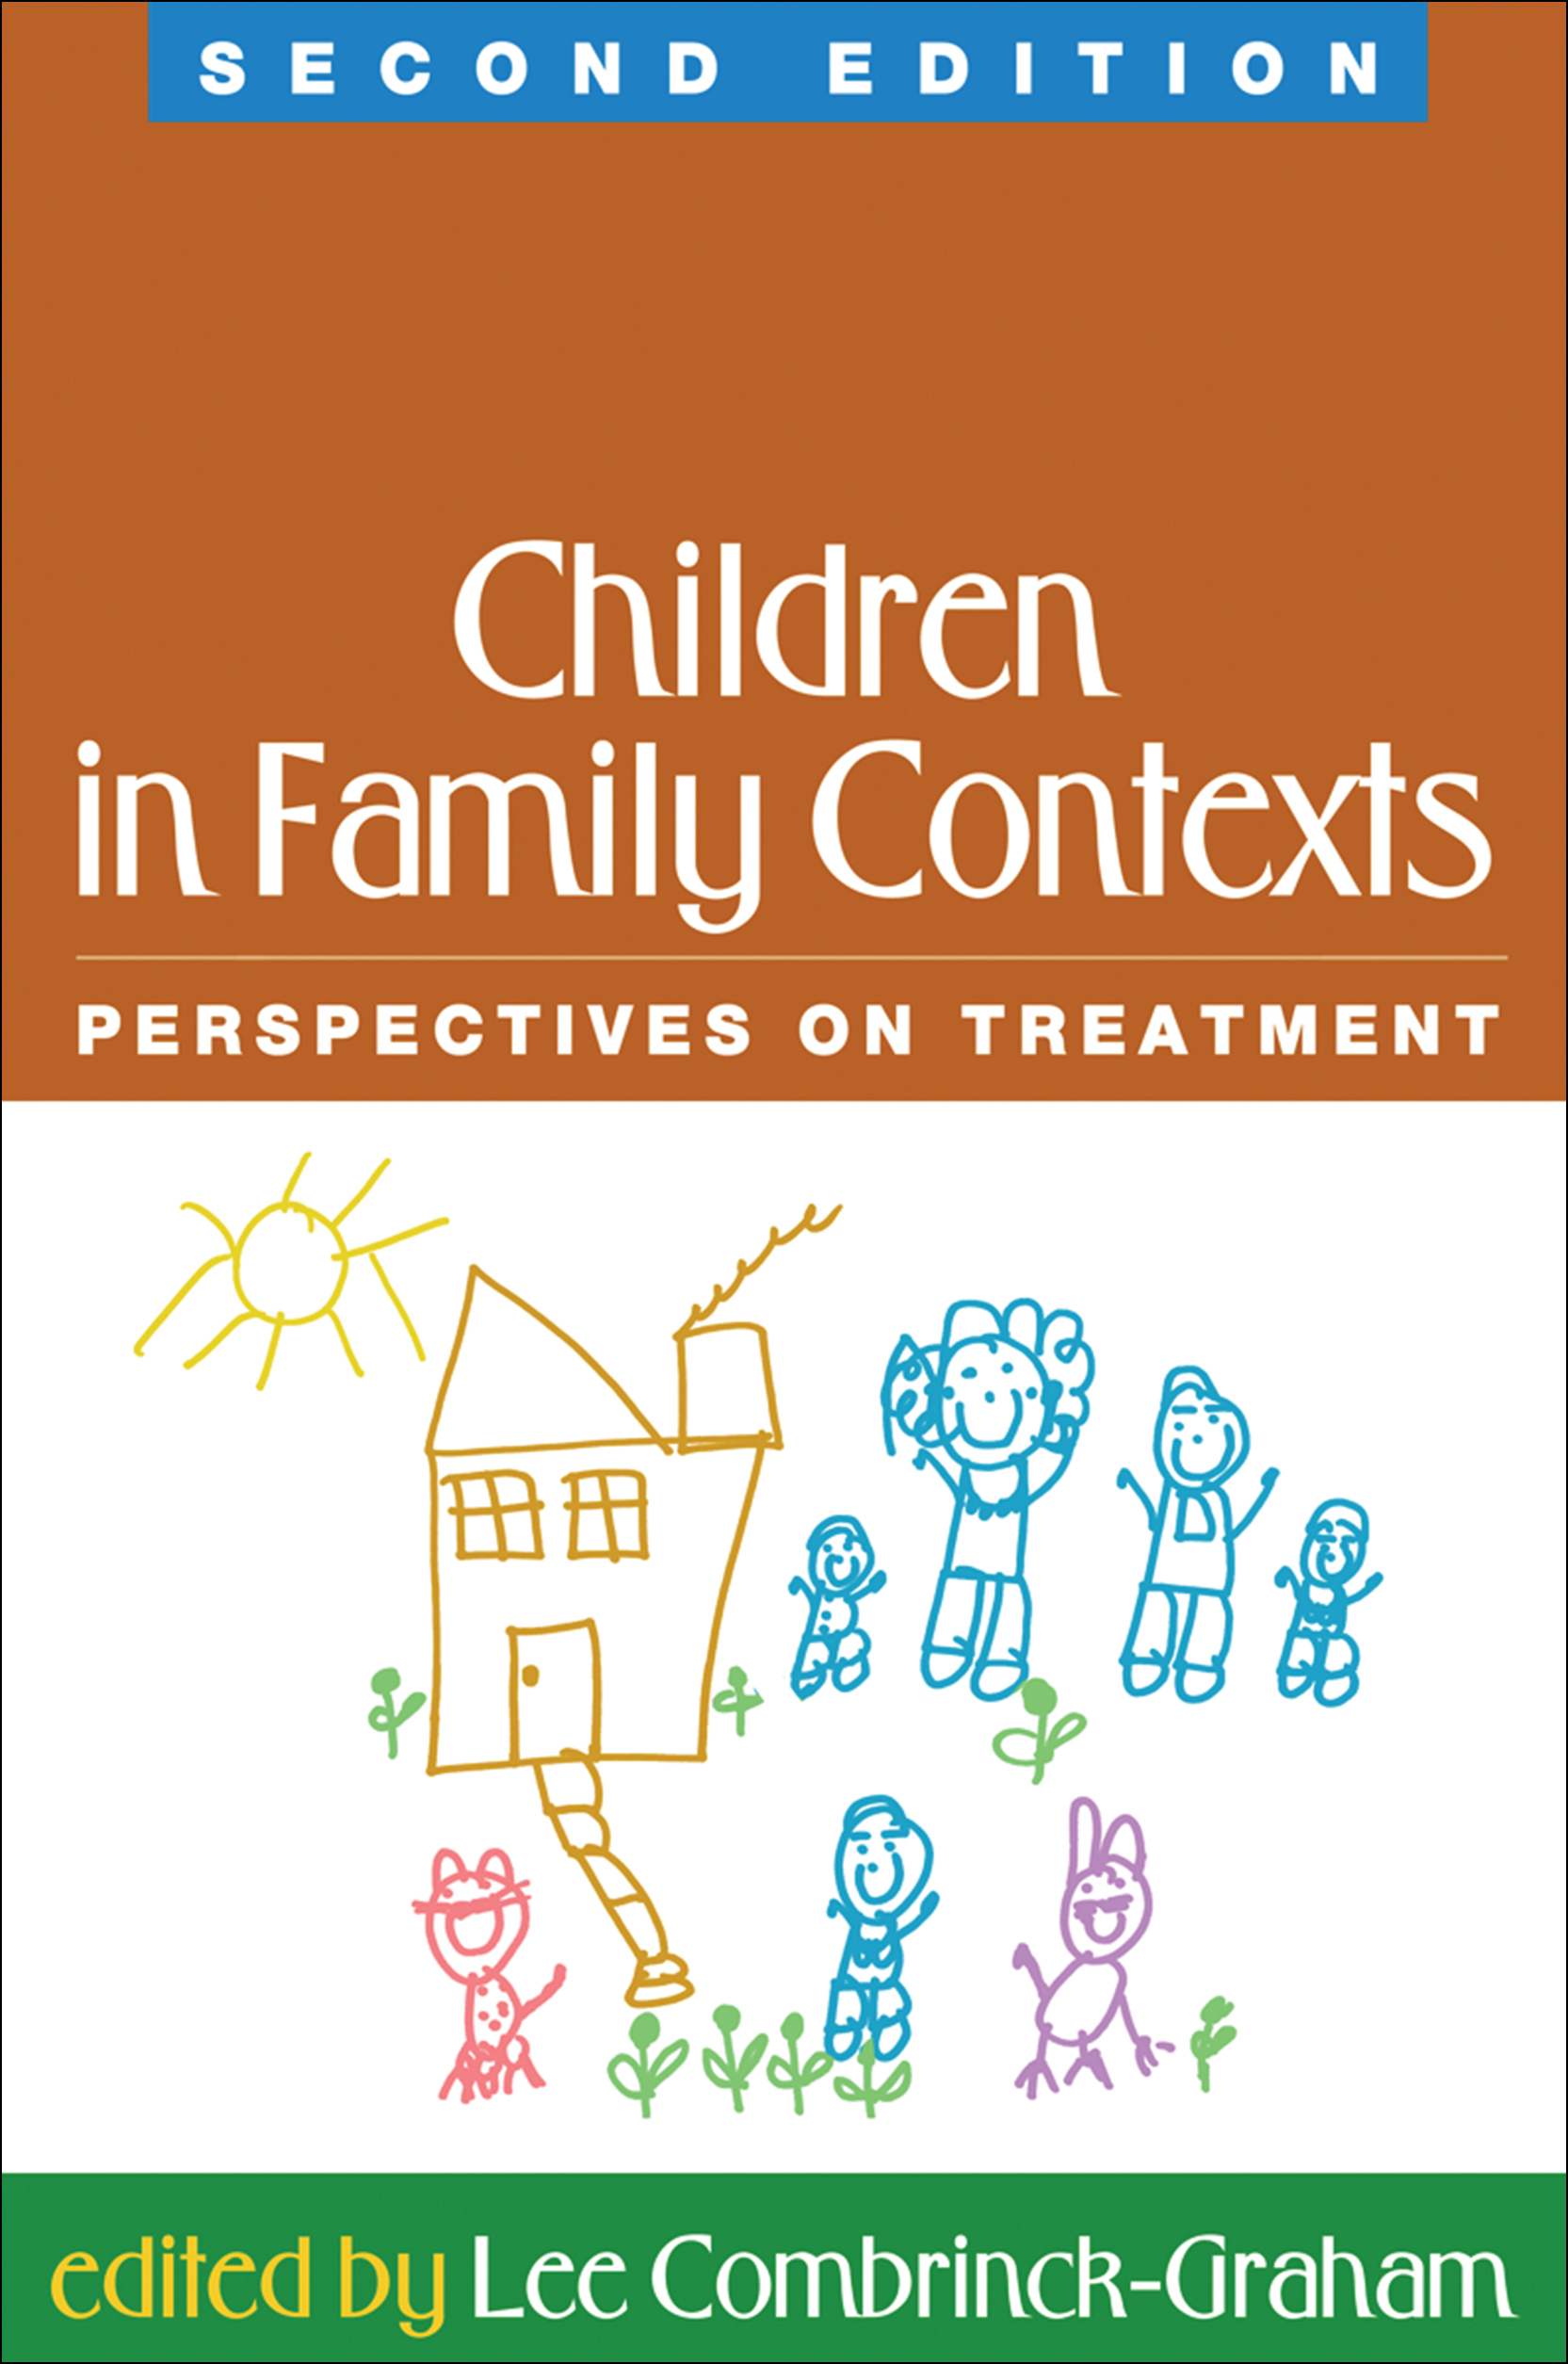 Children in Family Contexts, Second Edition